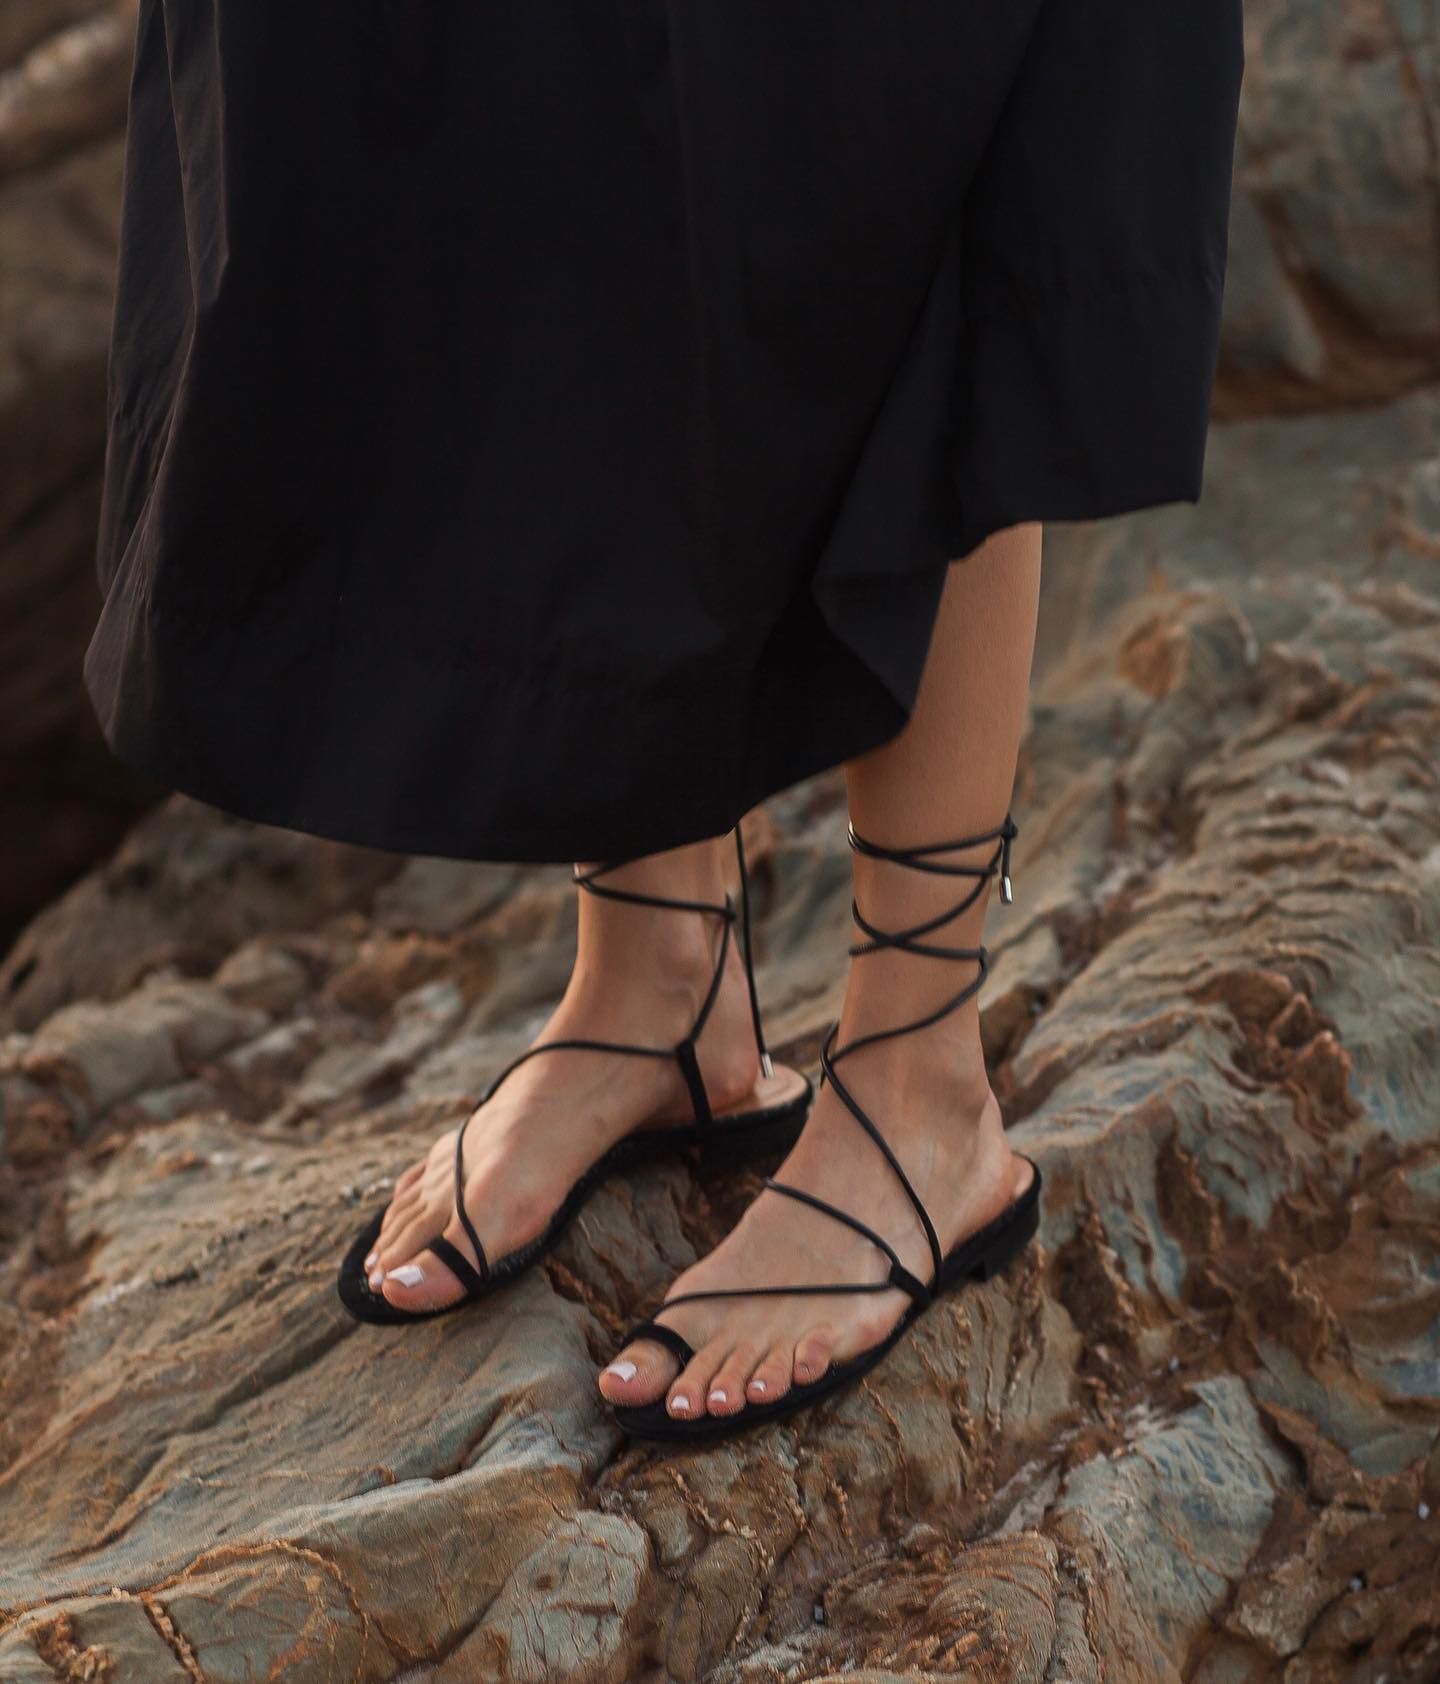 Girl wearing tight sandals standing on a coastal rock by the beach